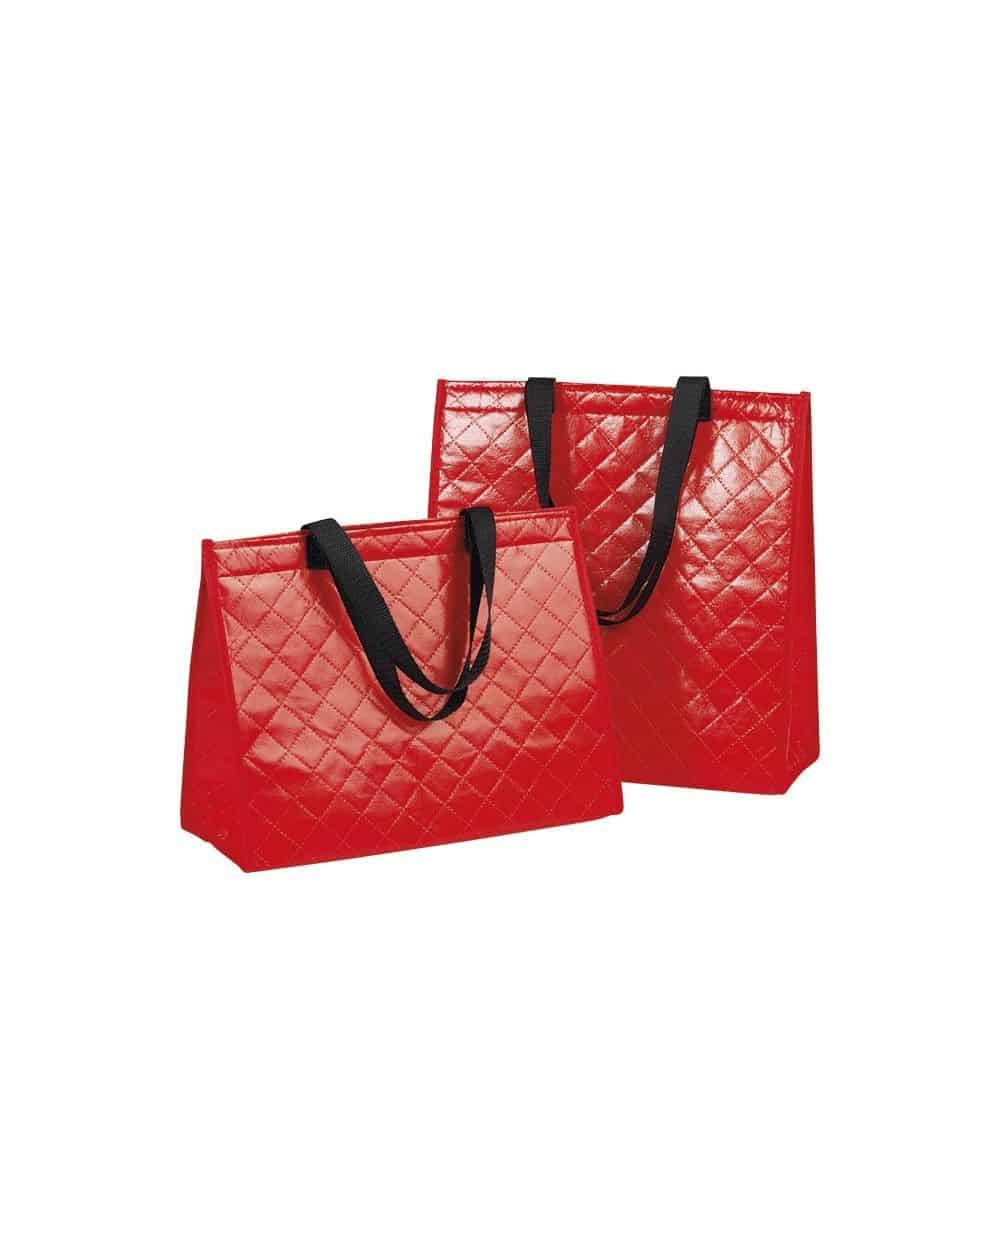 Sac isotherme rectangle rouge 2 anses grand modèle